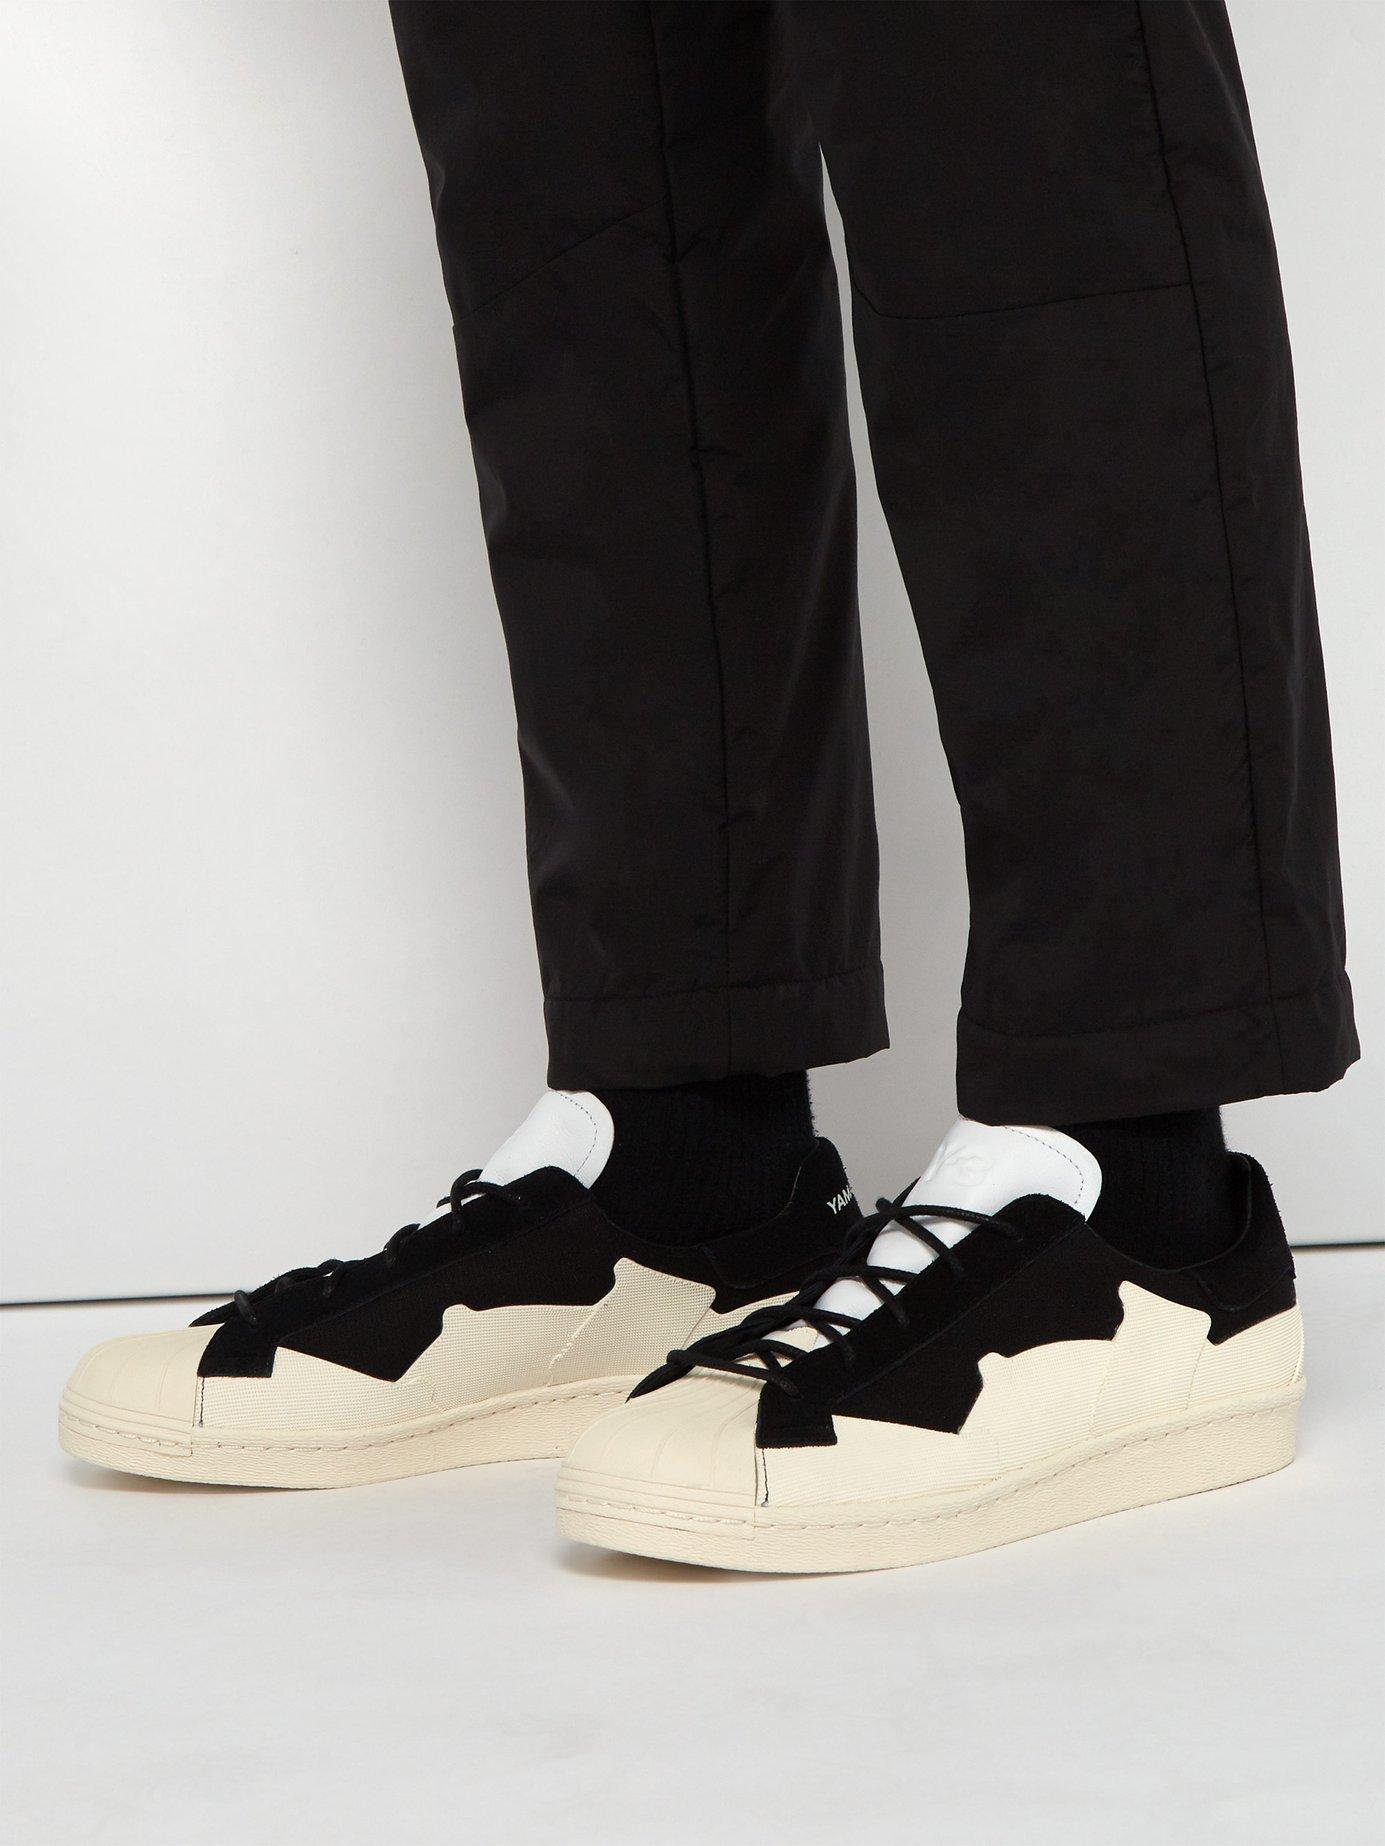 Y-3 Canvas Black And White Super Takusan Sneakers for Men - Lyst